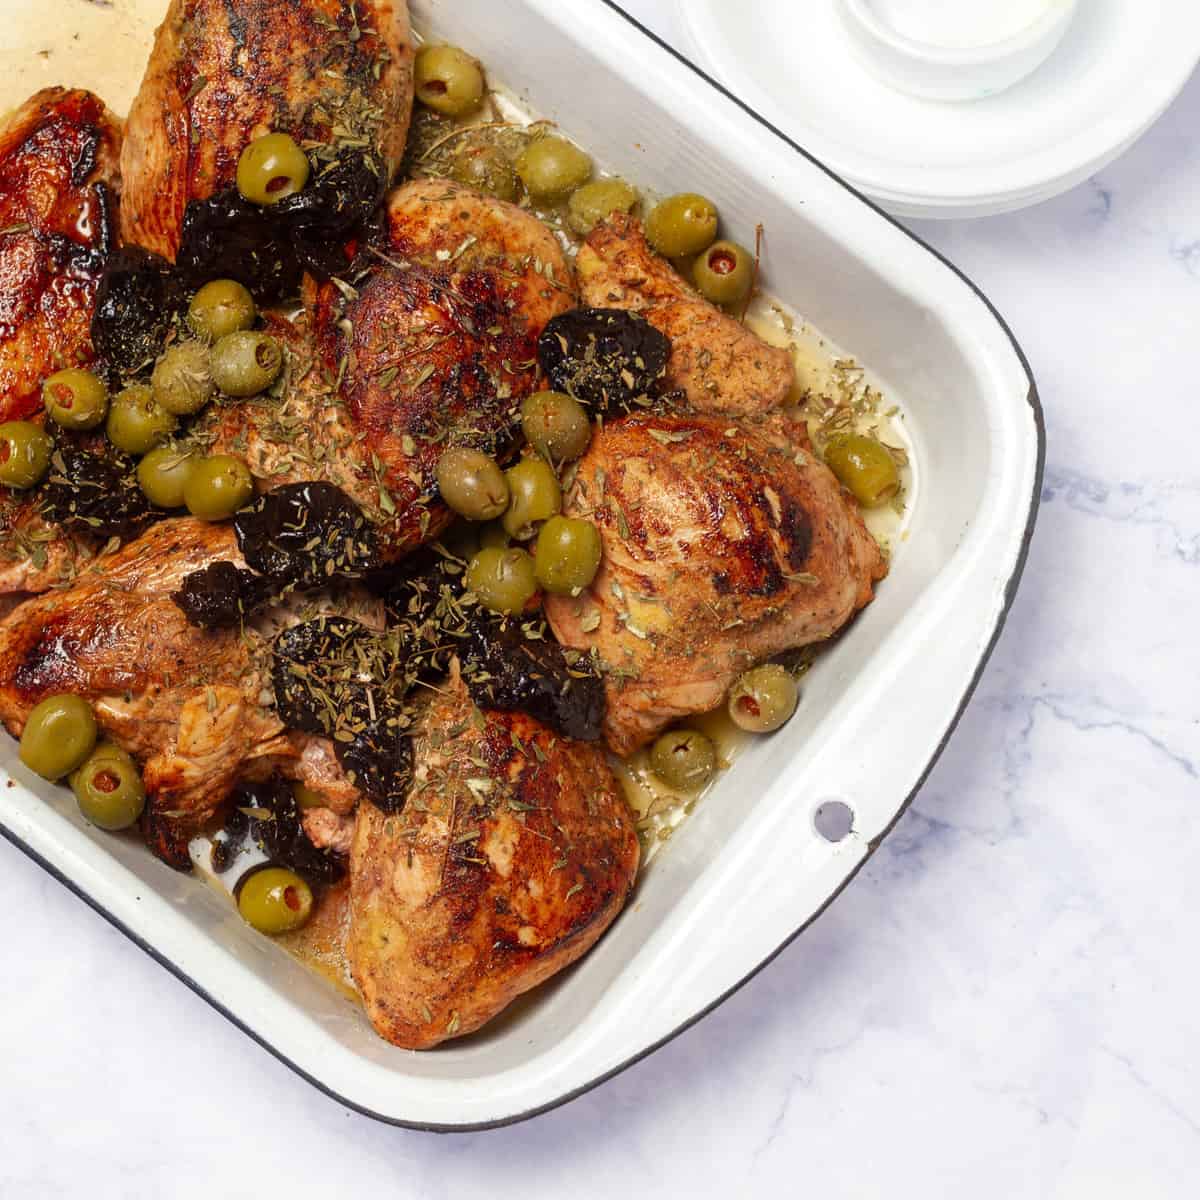 Scatter green olives and pitted prunes around the chicken in the baking dish